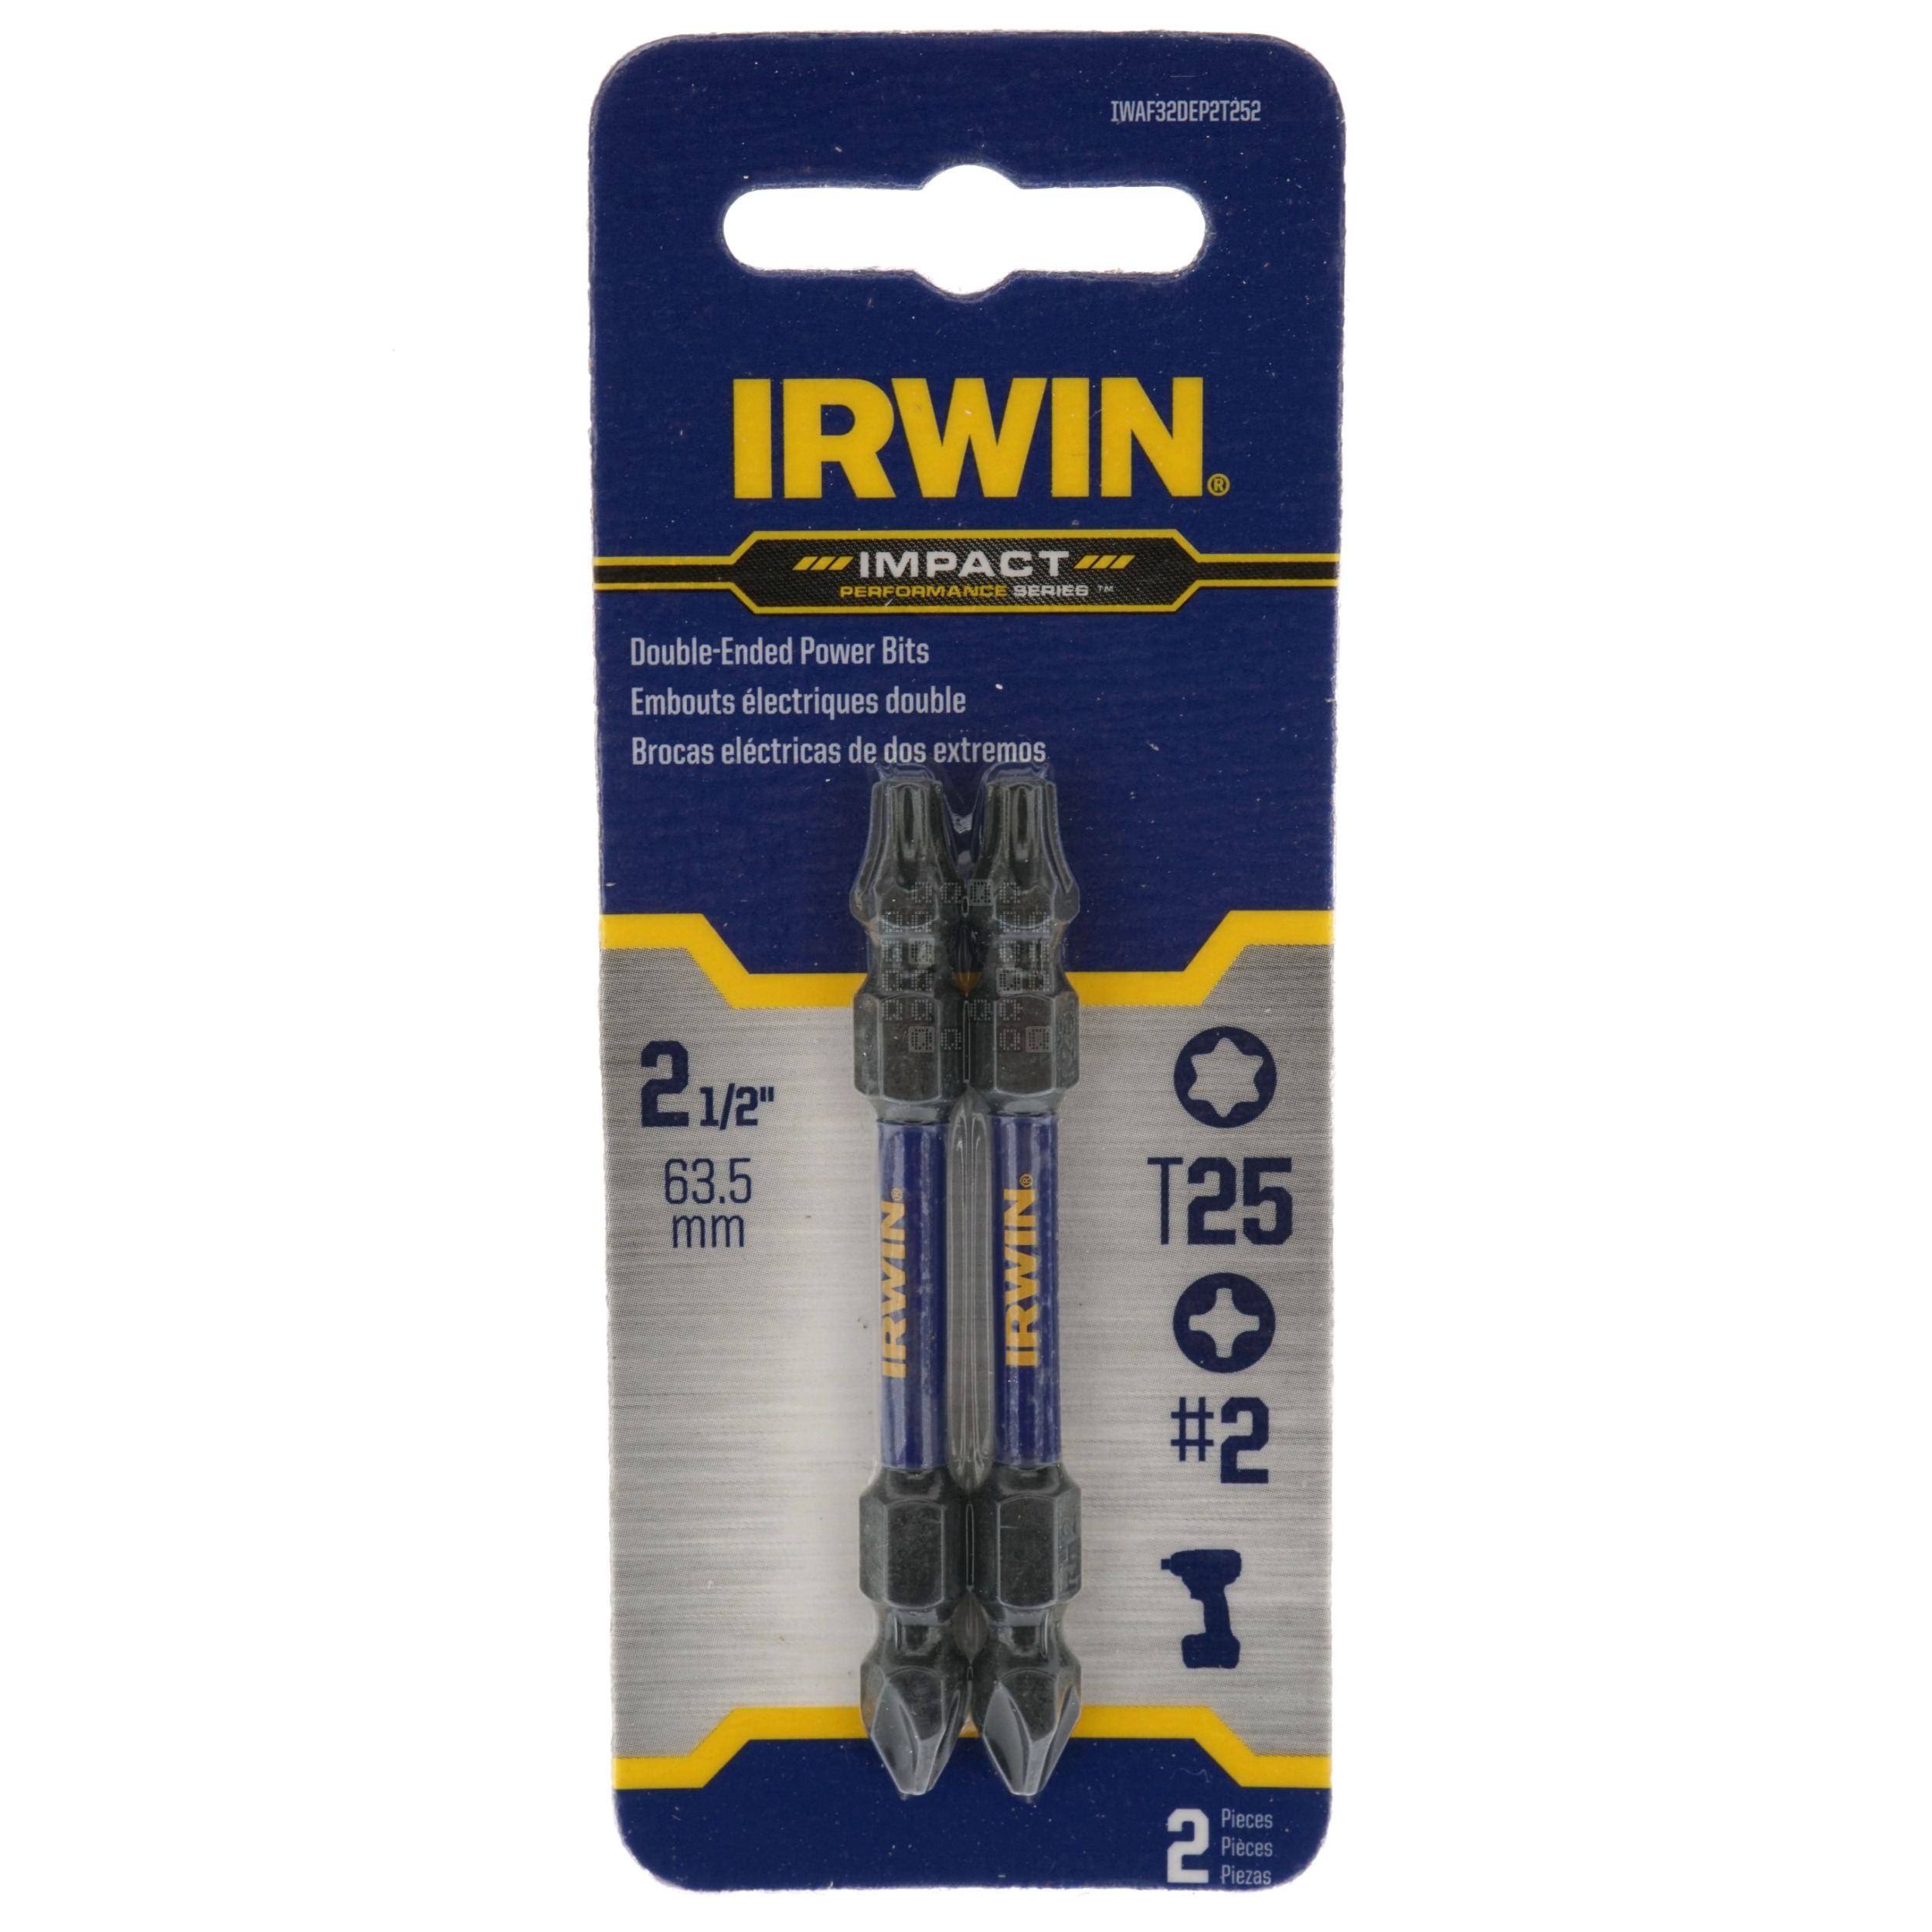 Irwin IWAF32DEP2T252 T25/#2 Phillips Double-Ended Impact Power Bits, 2-Pack, 2-1/2" Length